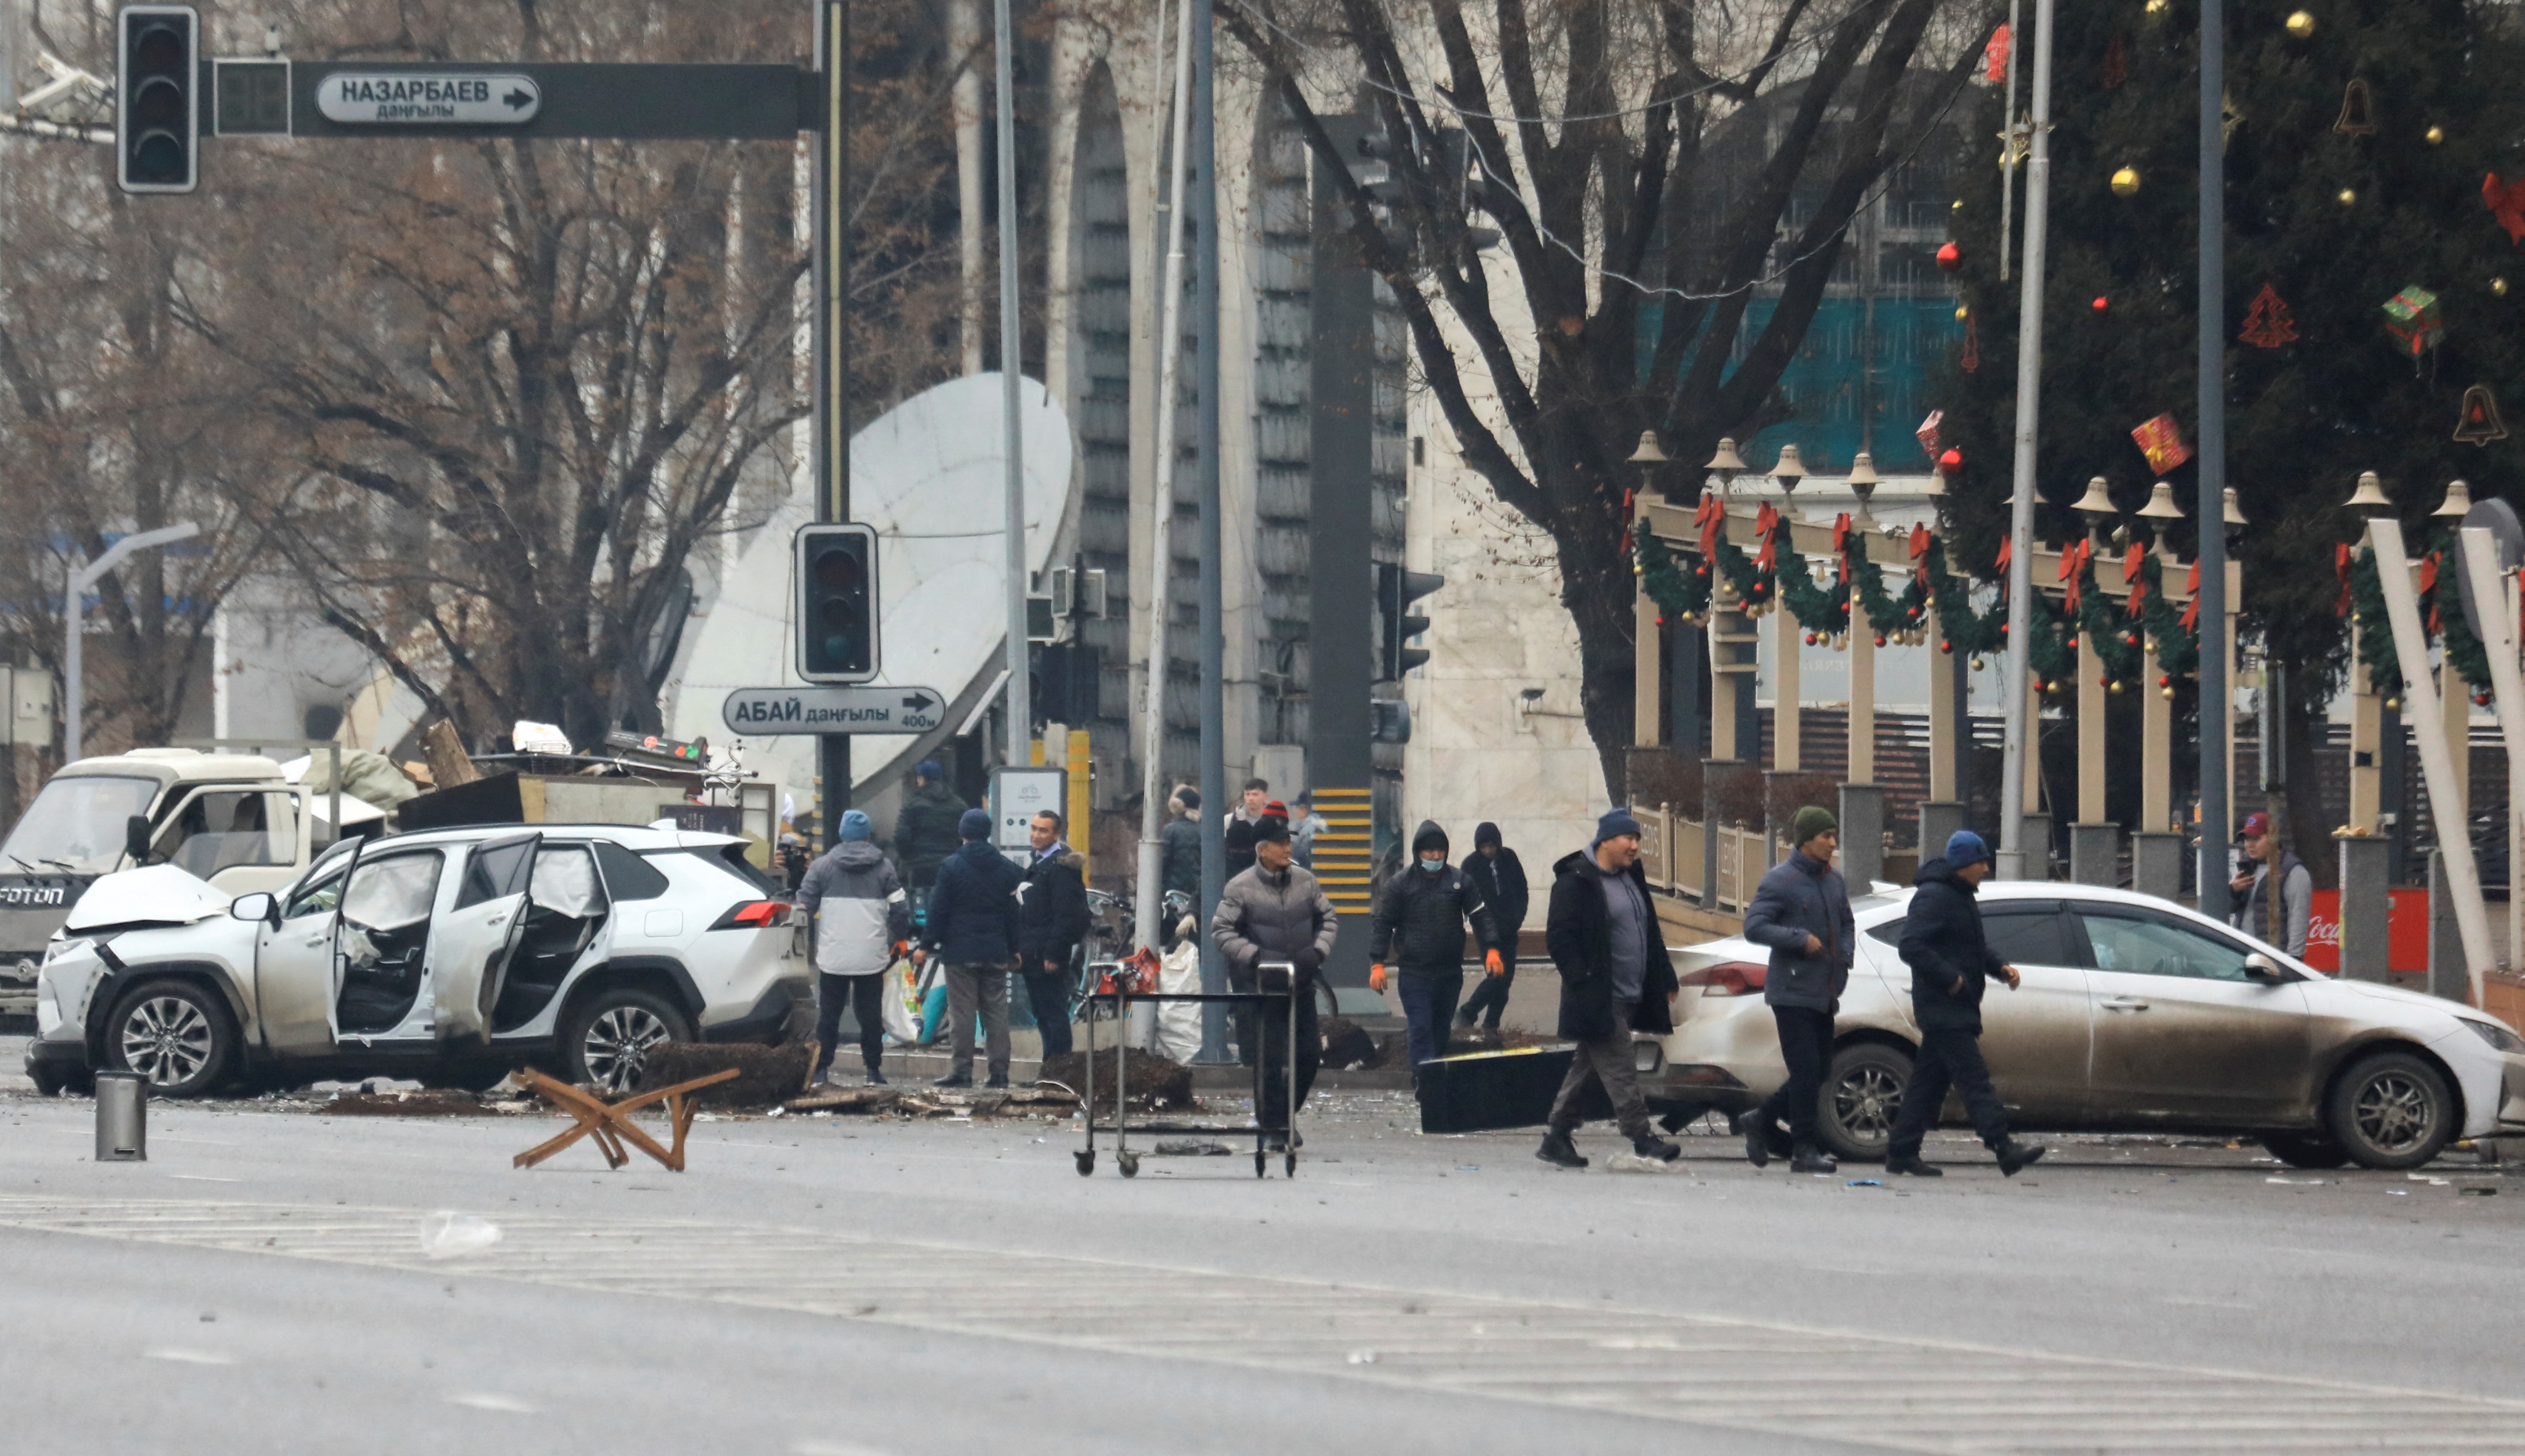 A car, which was damaged during the protests triggered by fuel price increase, is seen on a road in central Almaty, Kazakhstan January 7, 2022. REUTERS/Pavel Mikheyev